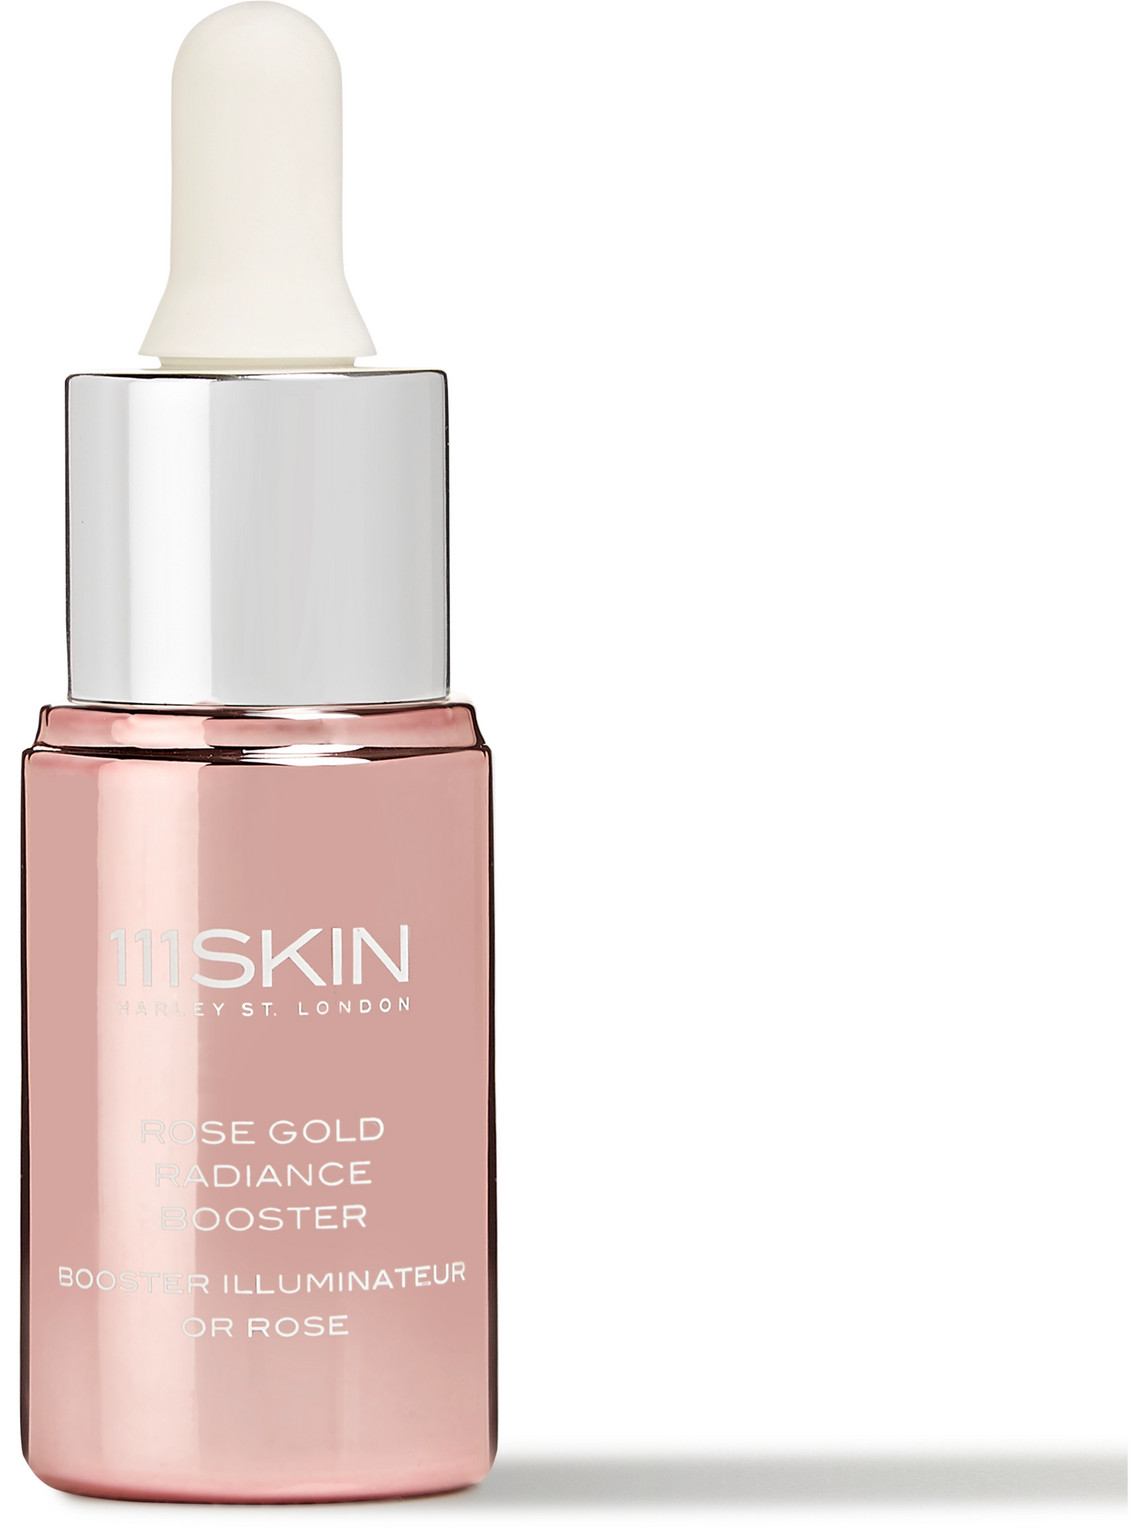 111skin Rose Gold Radiance Booster, 20ml In Colourless